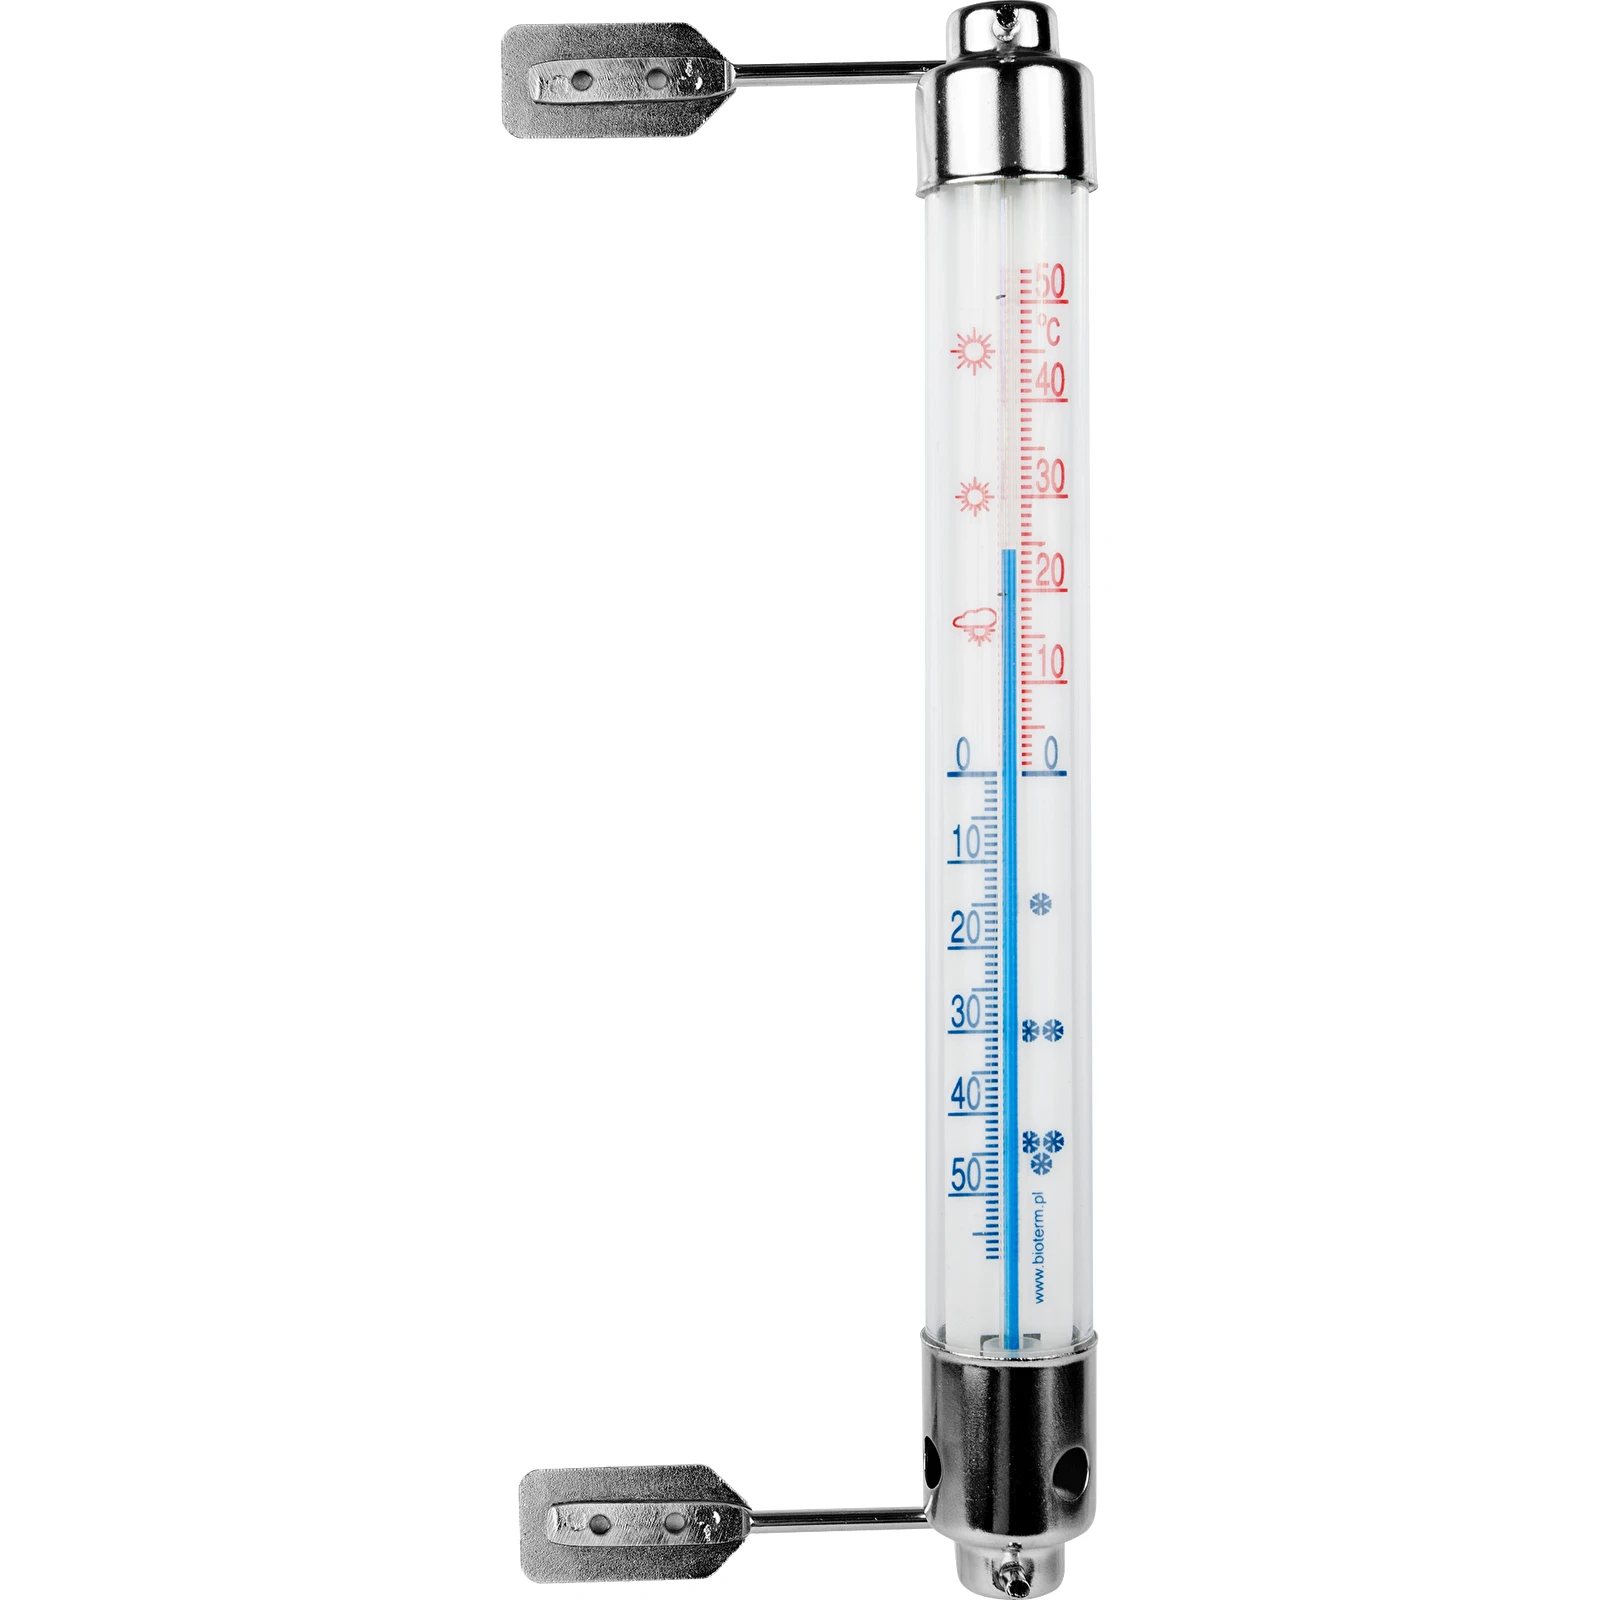 https://browin.com/static/images/1600/mercury-free-outdoor-window-thermometer-with-metal-frame-50-c-to-50-c-20cm-020600.webp